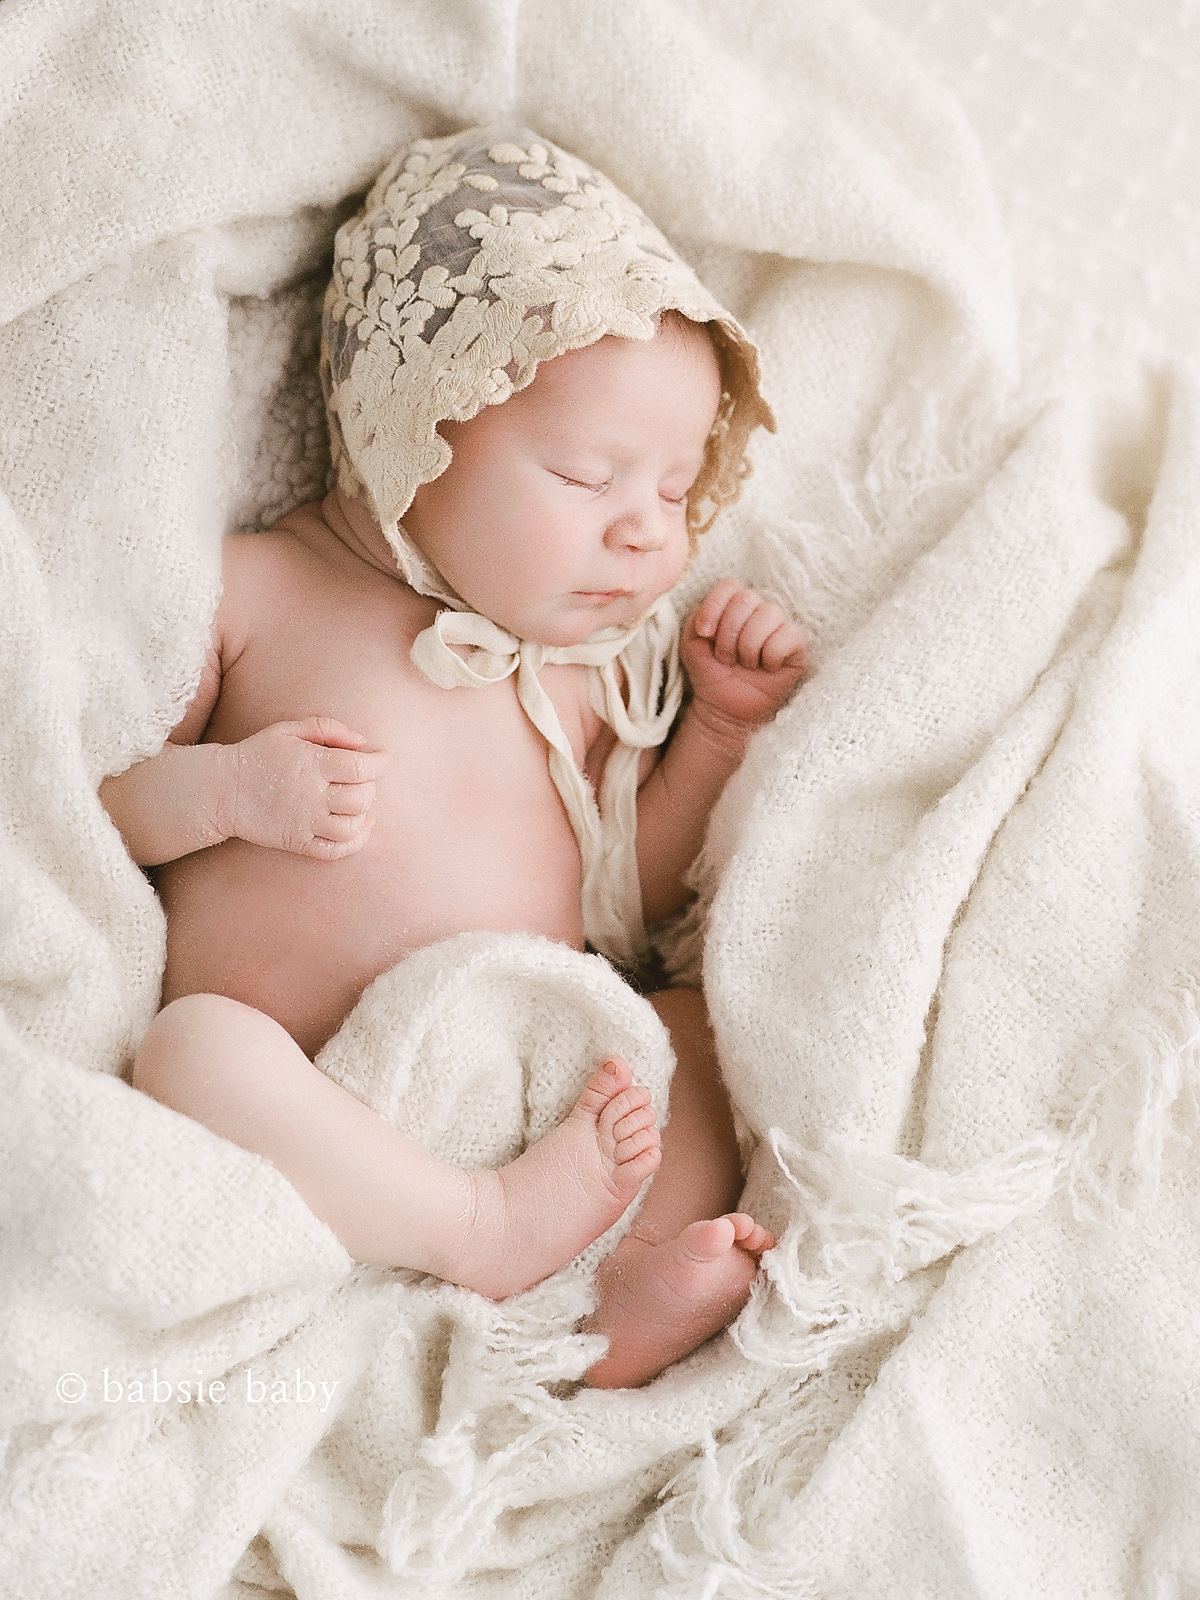 Sleeping baby girl wearing a lace ivory bonnet.